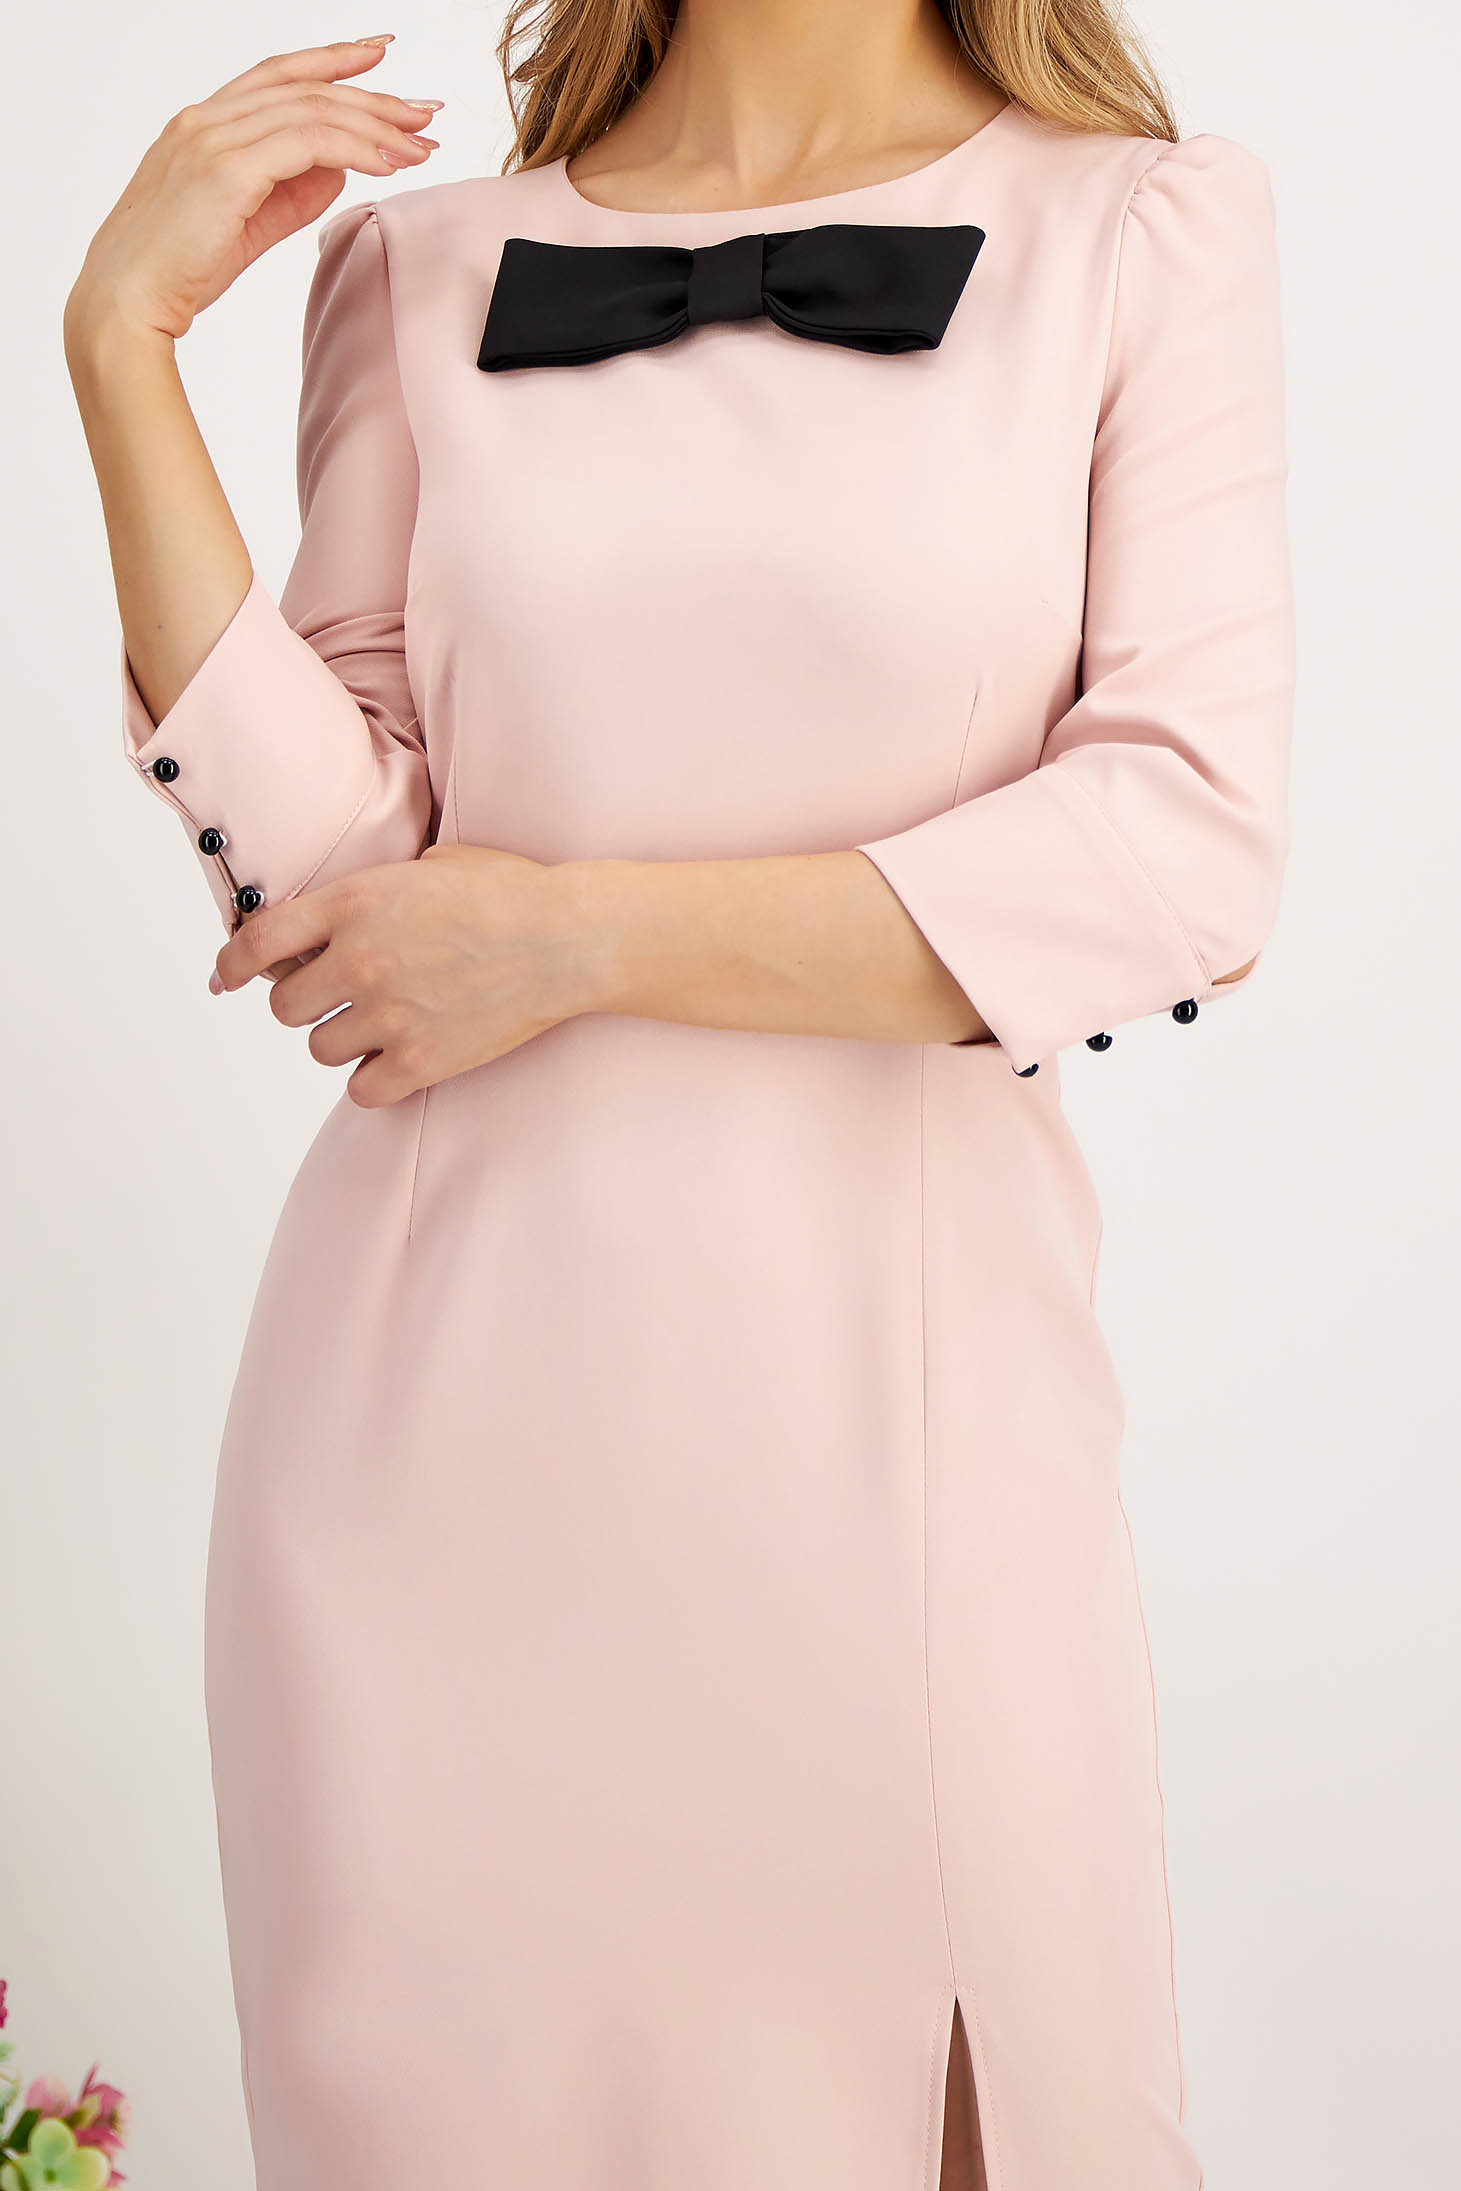 Light Pink Elastic Fabric Short Pencil Dress with Leg Slit Accessorized with a Bow - Artista 2 - StarShinerS.com